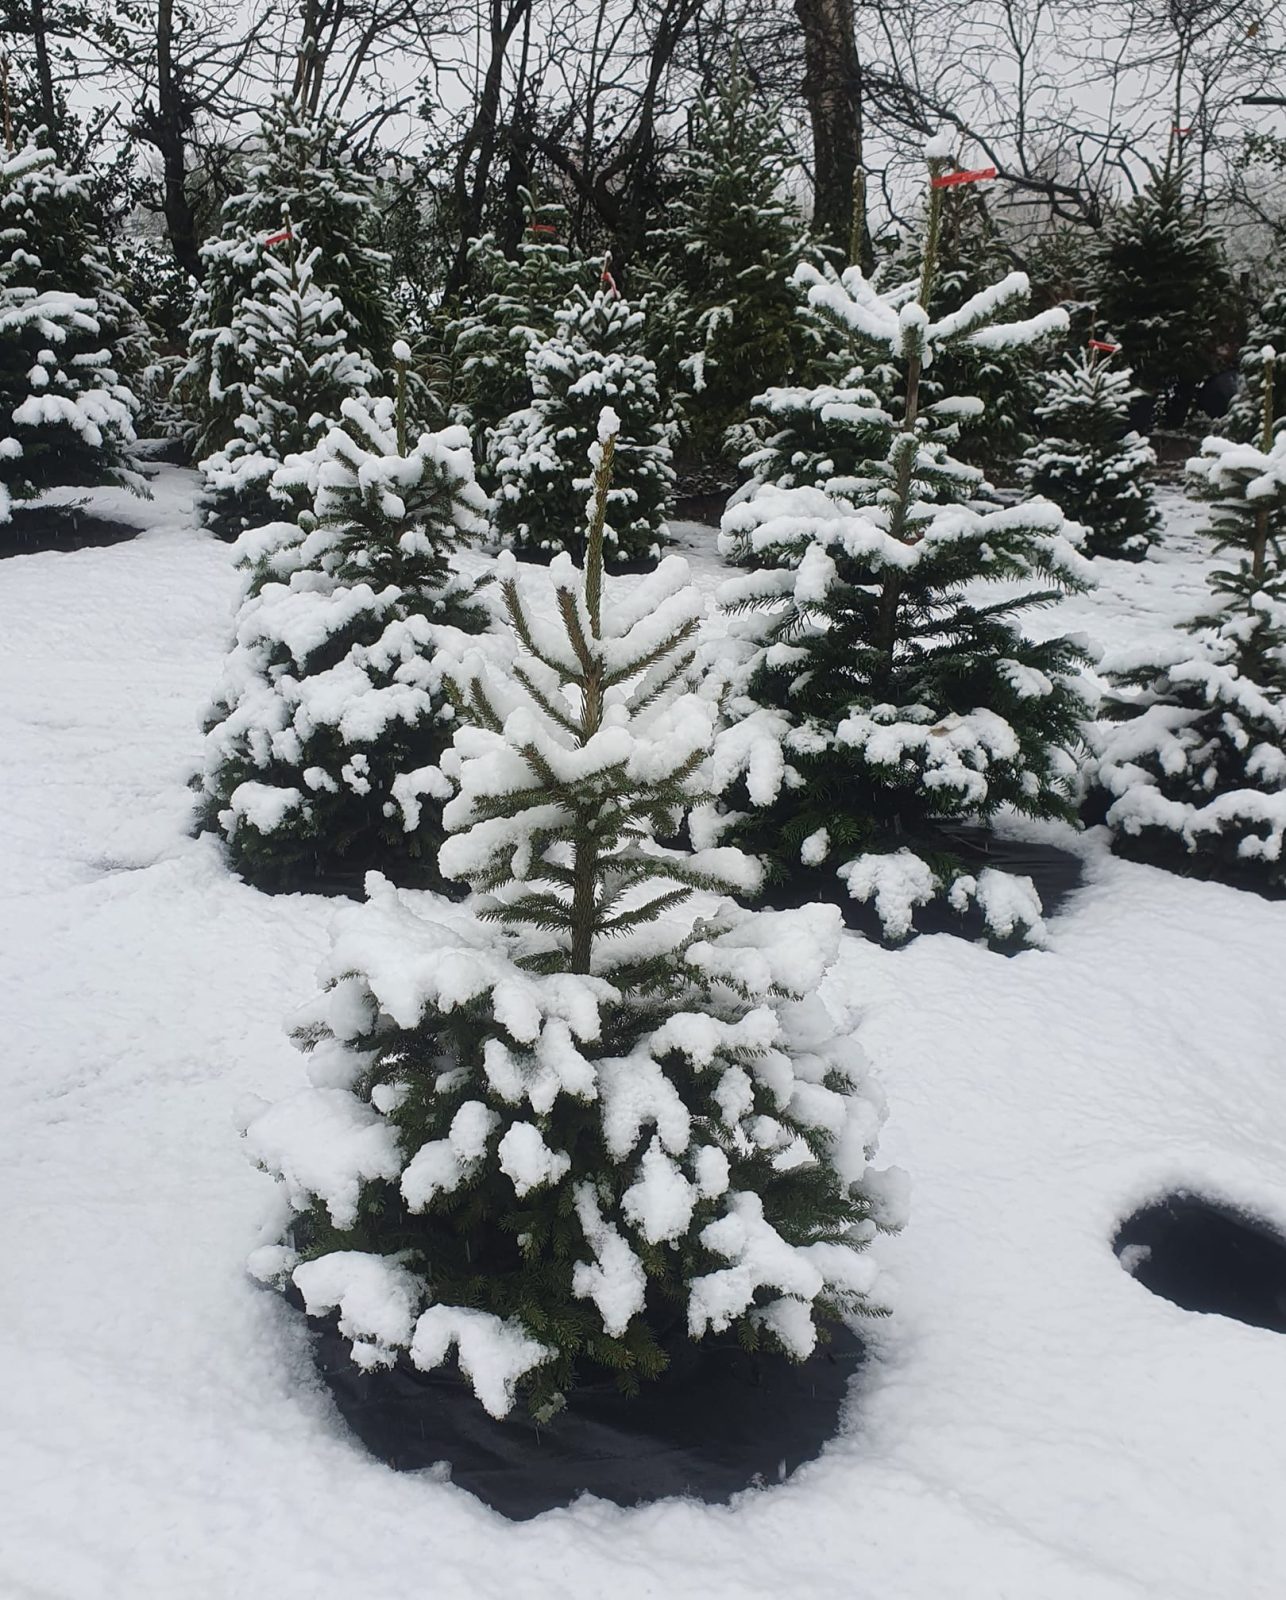 This company replants your Christmas tree &#8211; then rents it back to you every year, The Manc